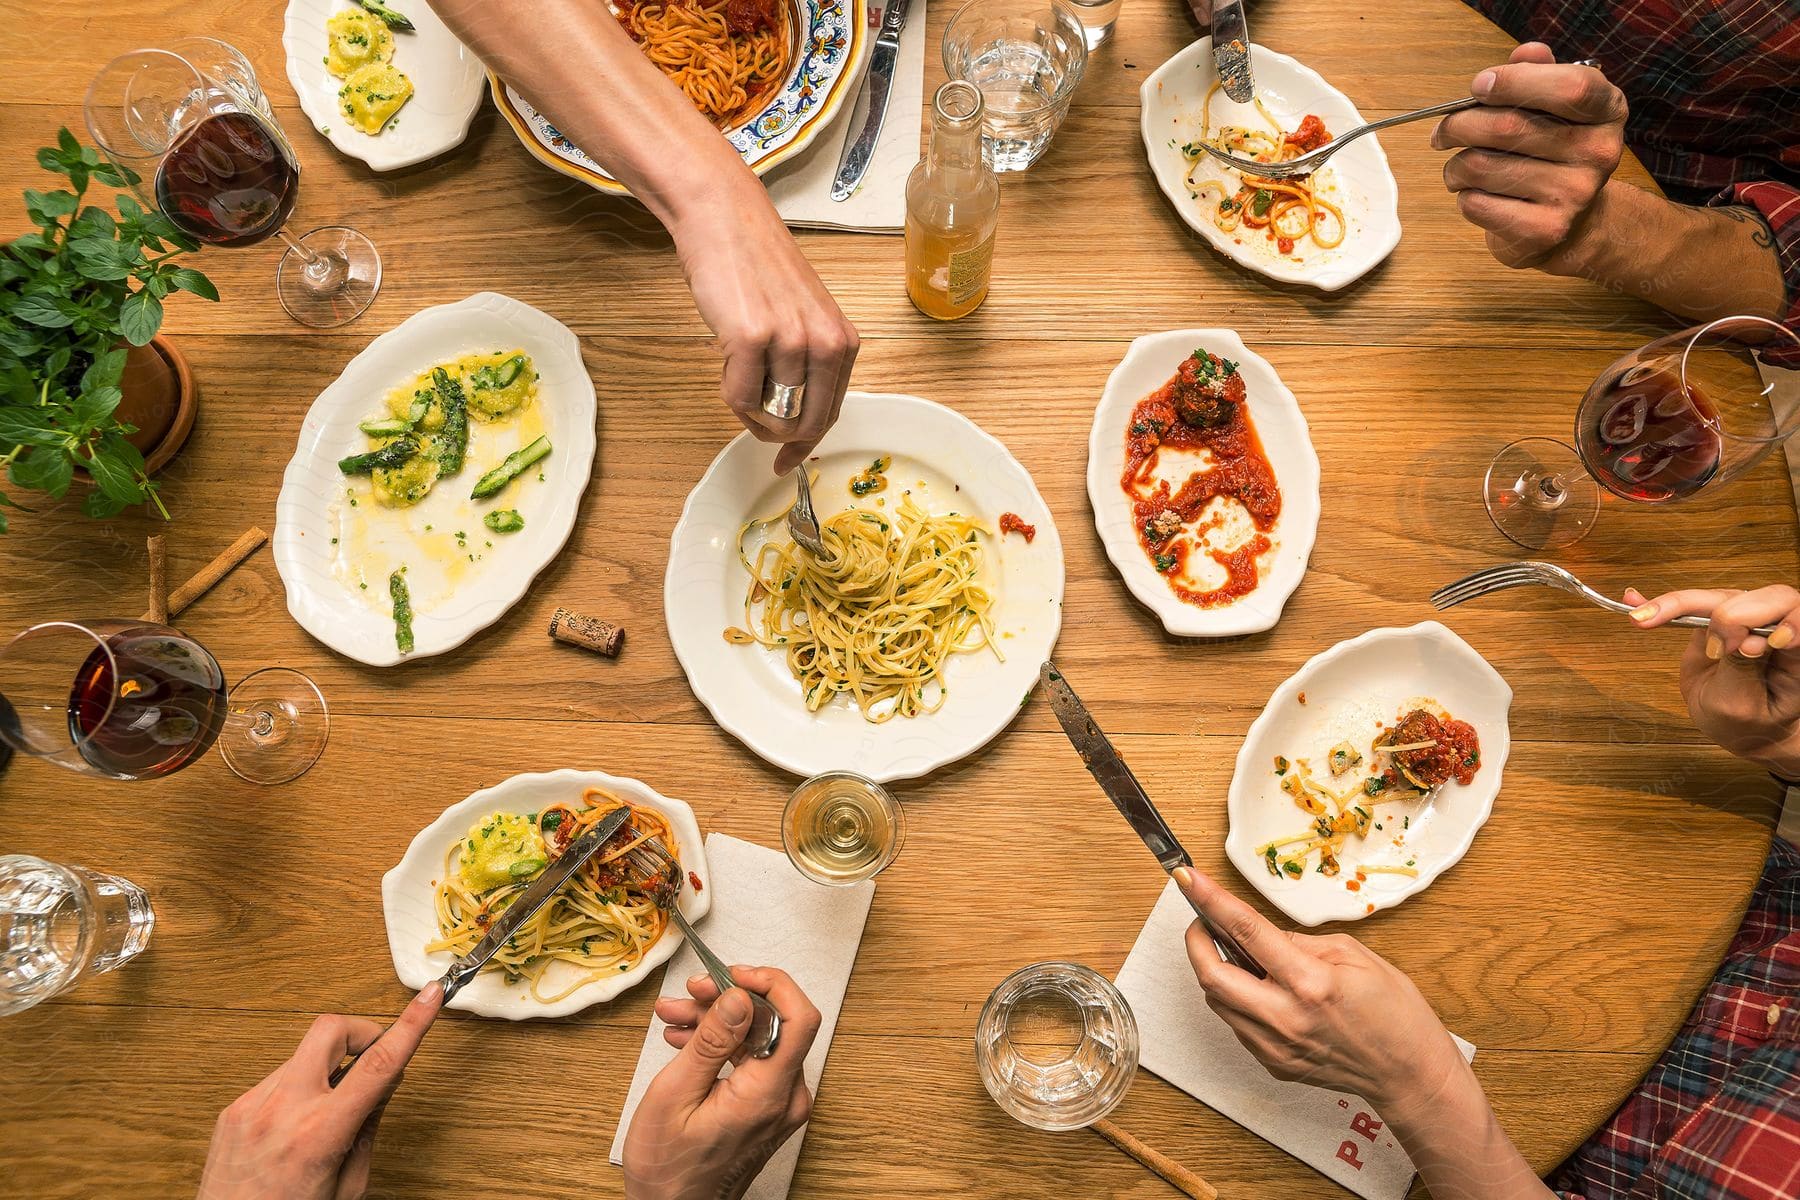 People enjoying plates of spaghetti at a table